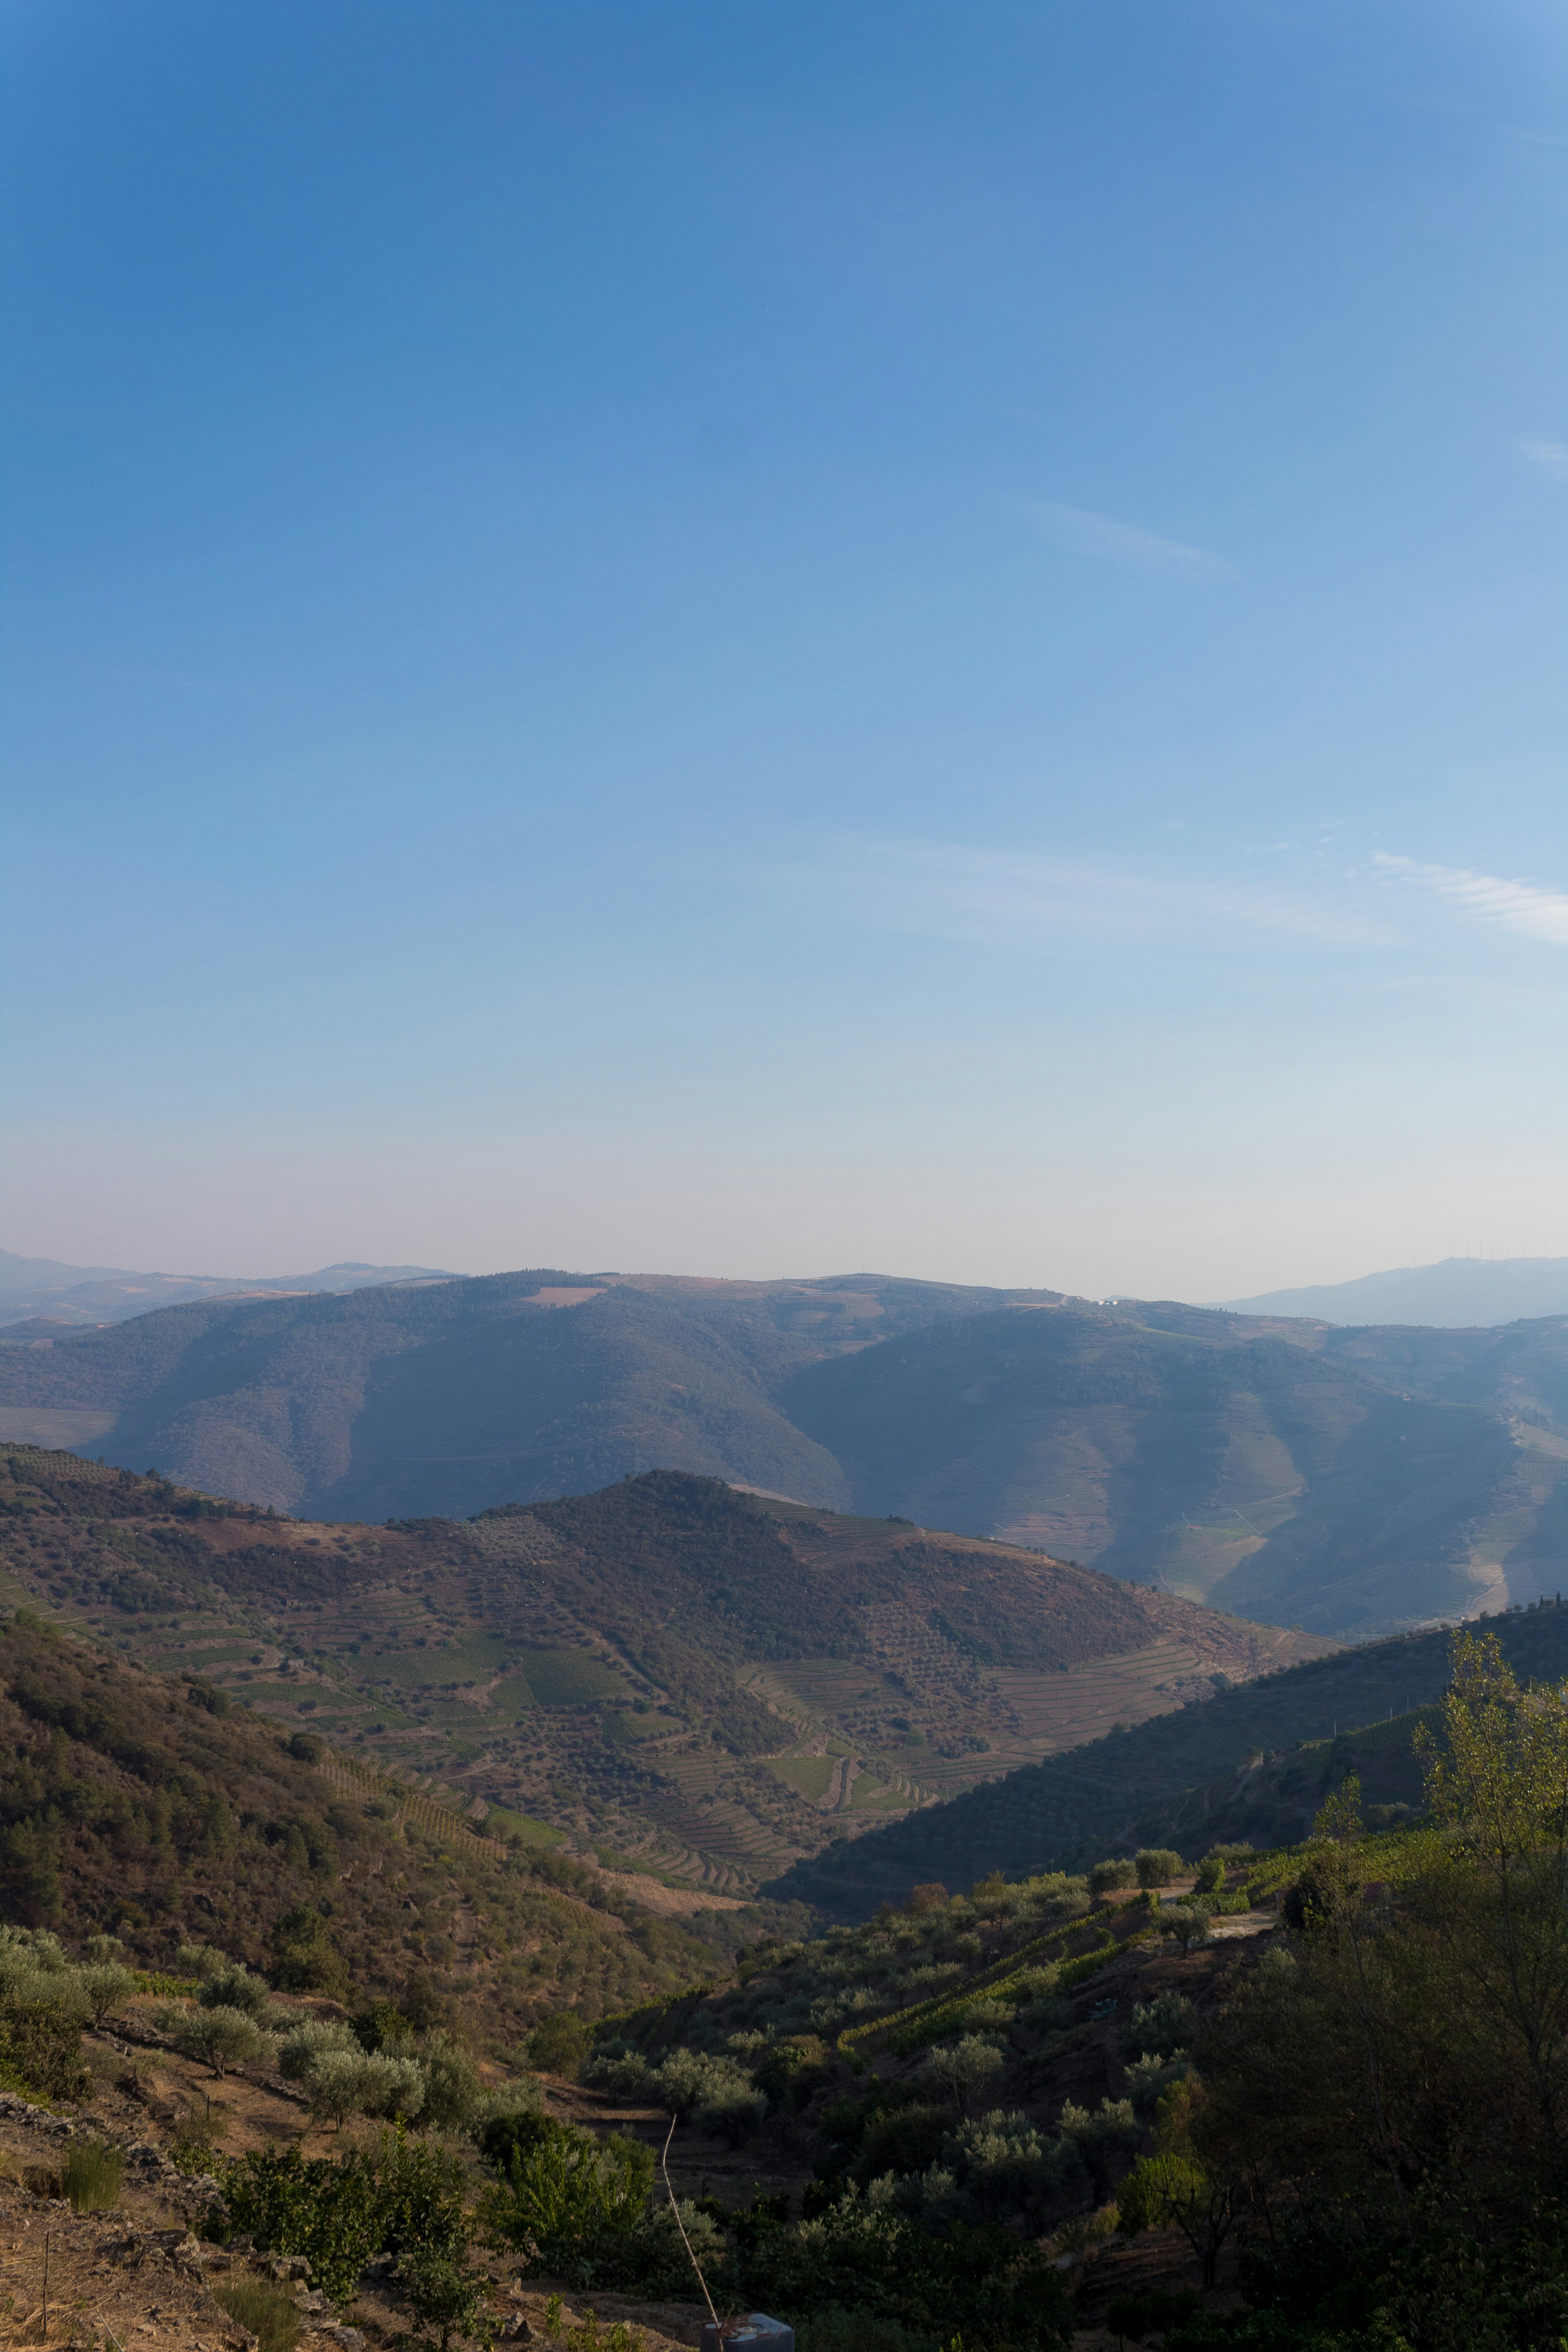 A view of the Douro valley in Ervedosa do Douro.